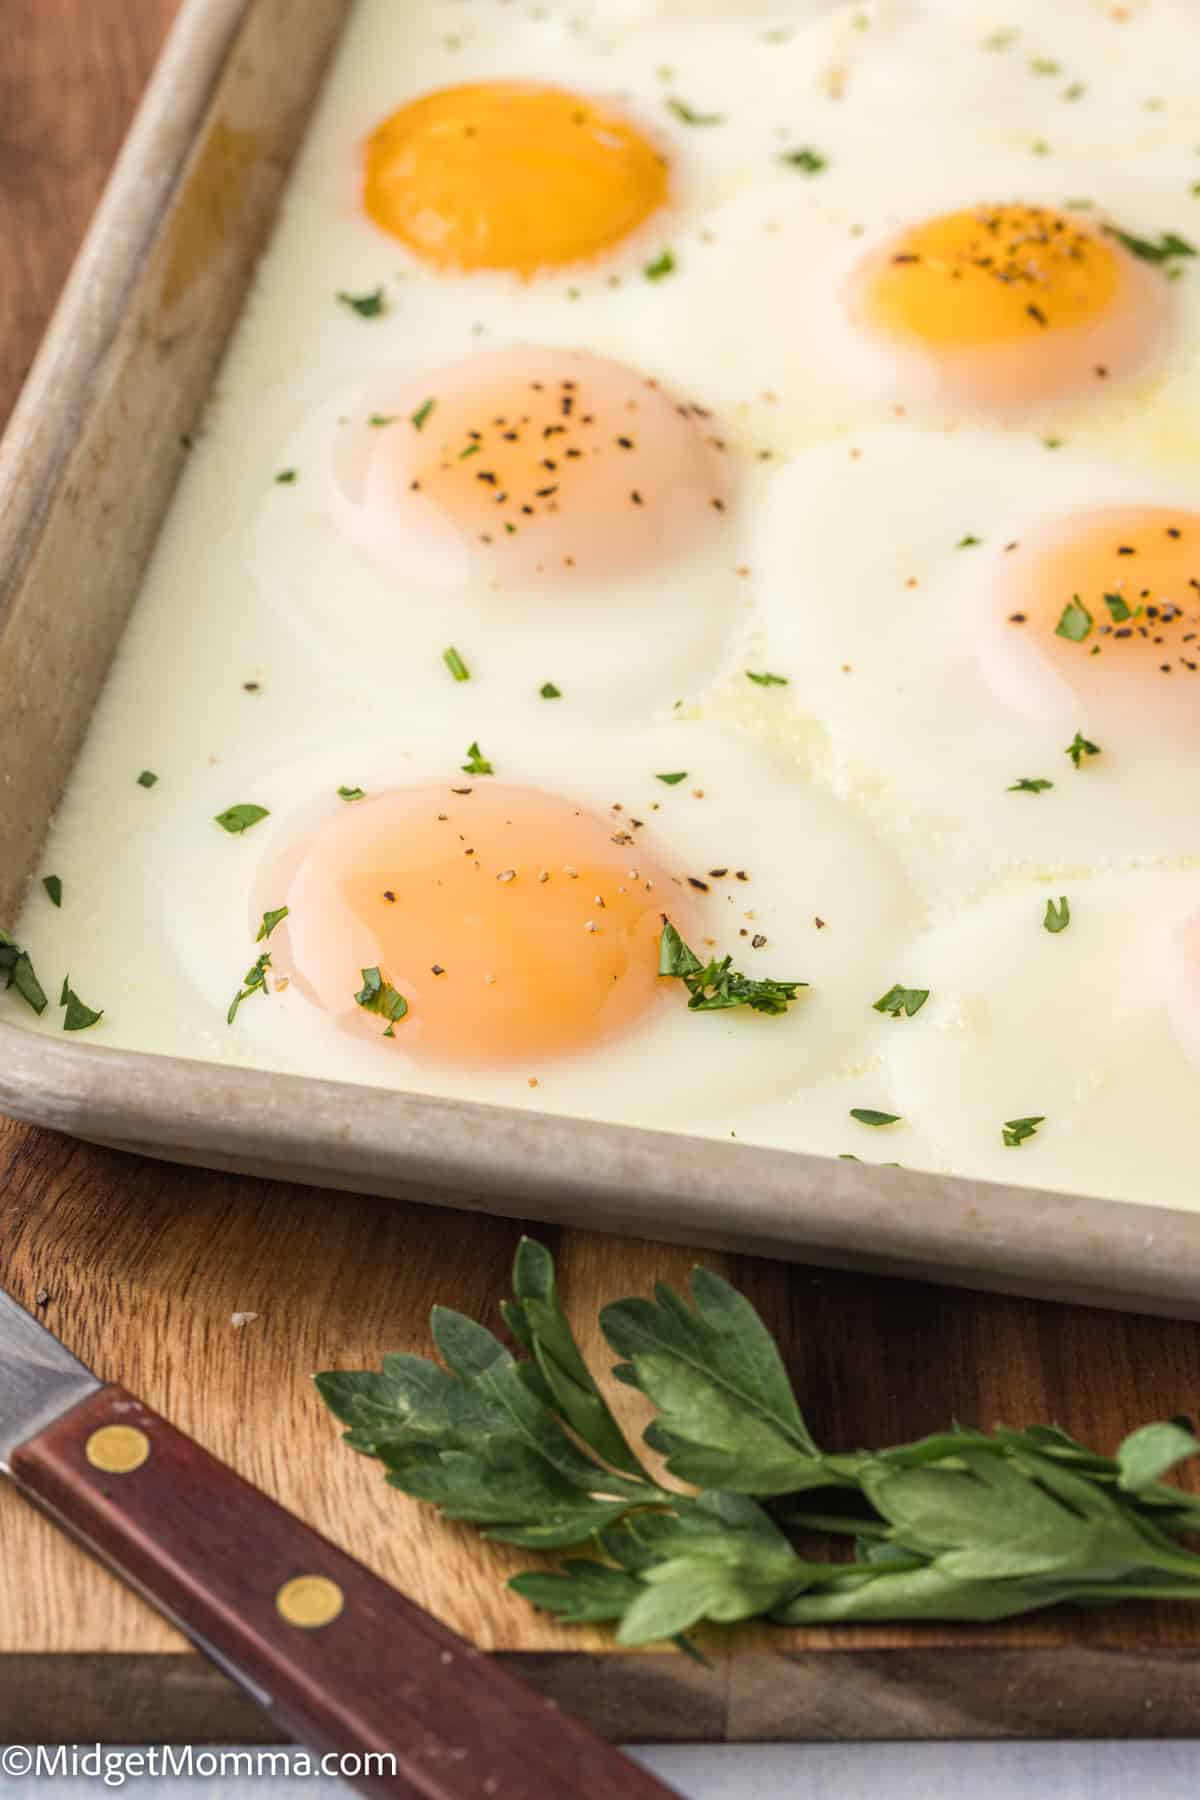 A baking sheet with six sunny-side-up eggs garnished with chopped herbs, resting on a wooden surface next to a knife and fresh herbs.